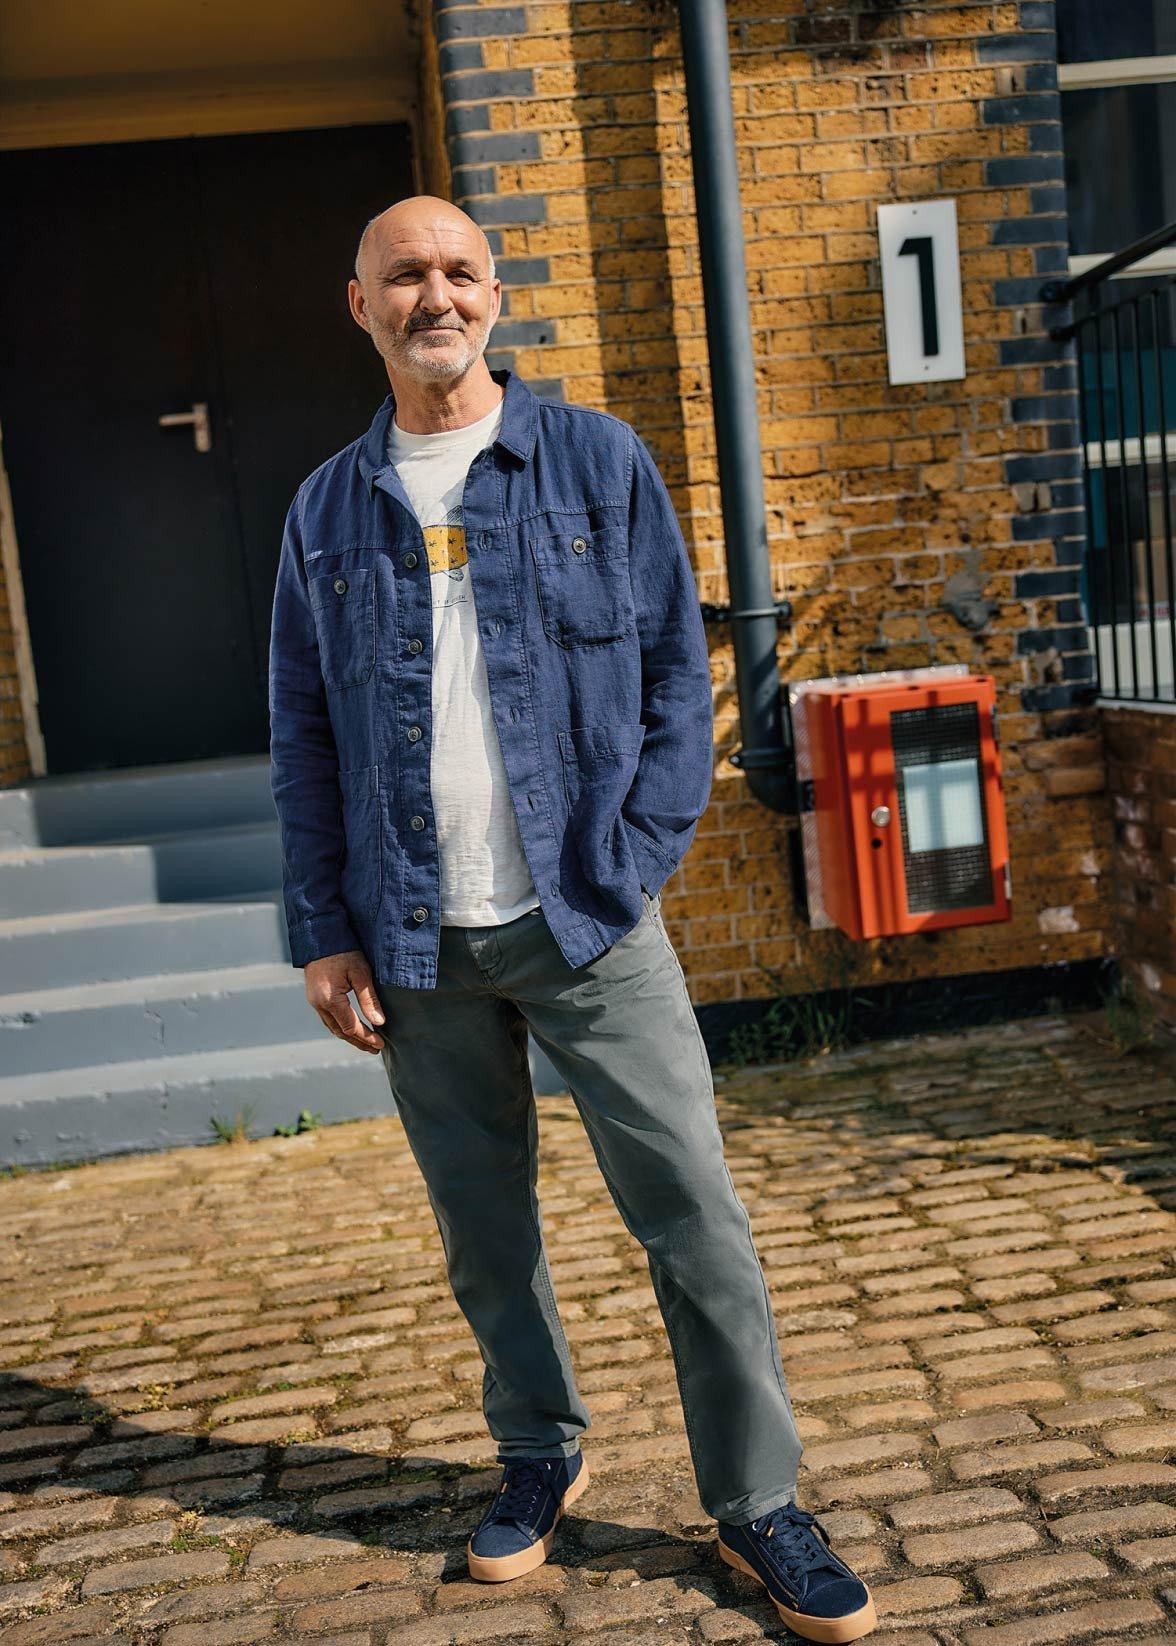 Man in blue denim shirt and trousers